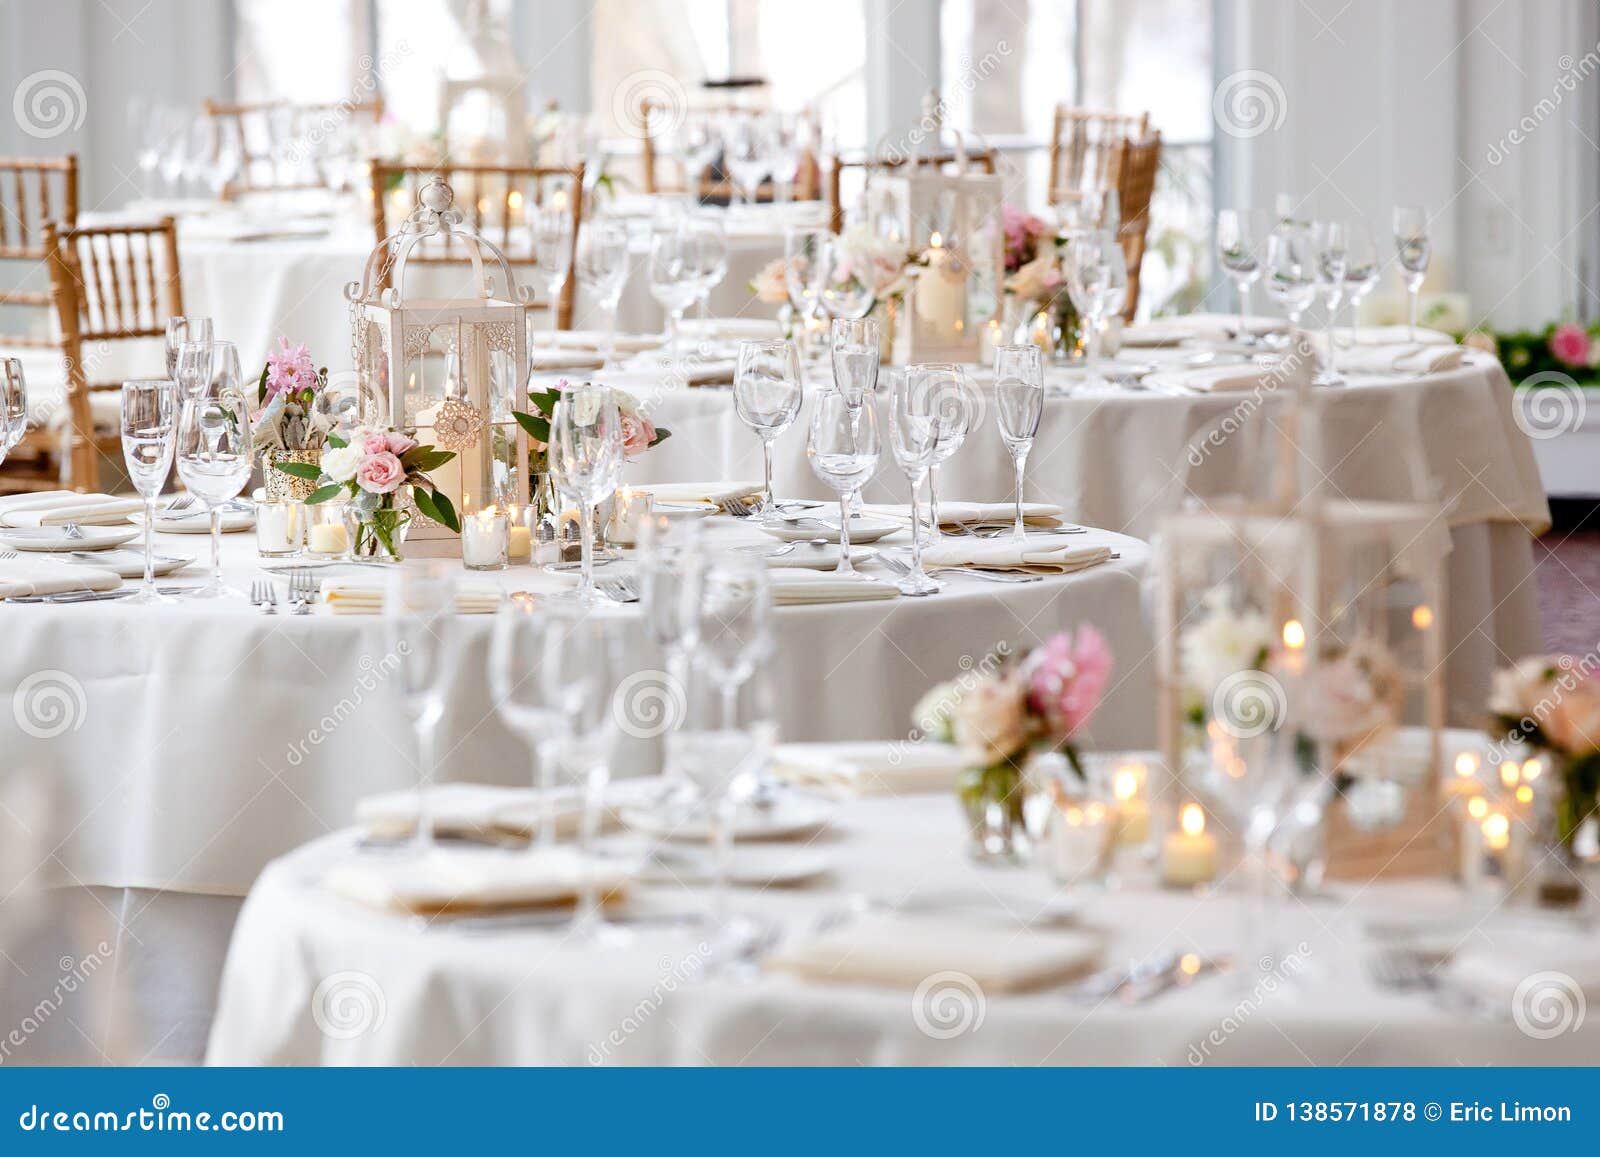 Wedding Table Decoration Series Tables Set For Fine Dining Stock Photo Image Of Design Elegant 138571878